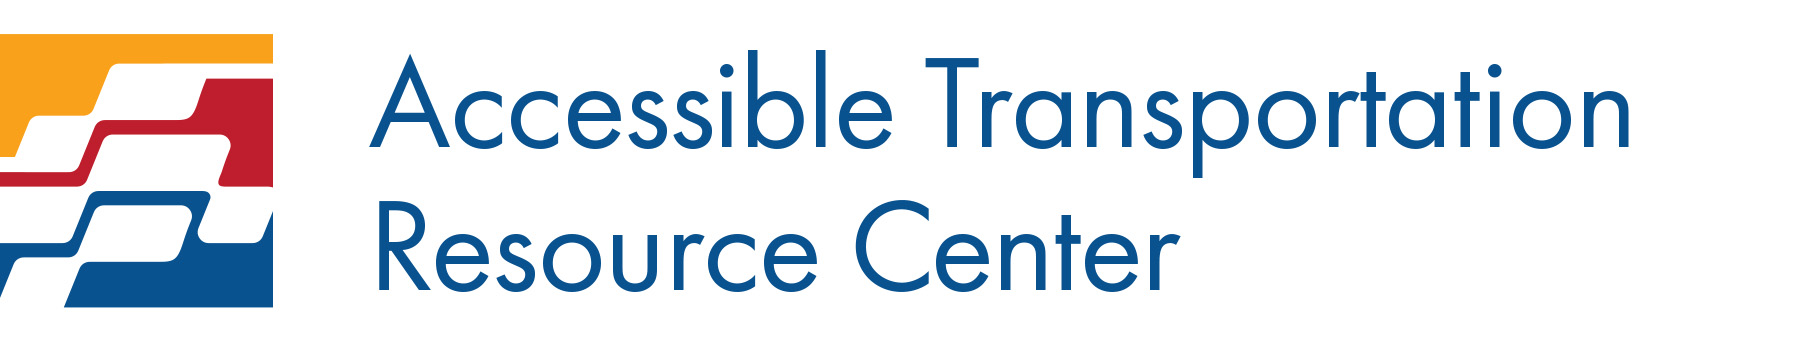 Accessible Transportation Resource Center